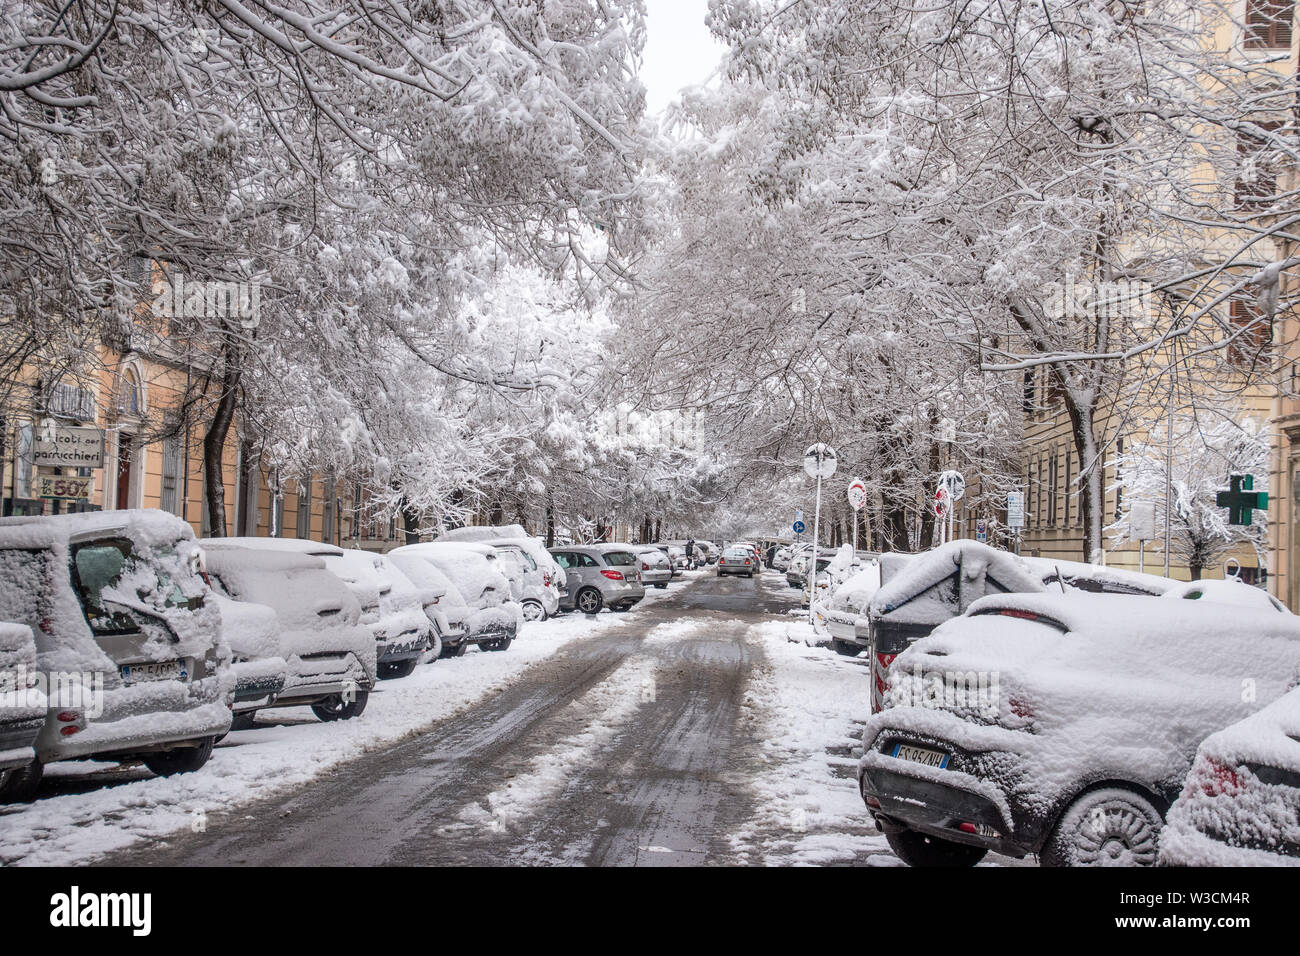 The streets of Rome, Italy turned into a winter wonderland after a heavy snow fall. Stock Photo